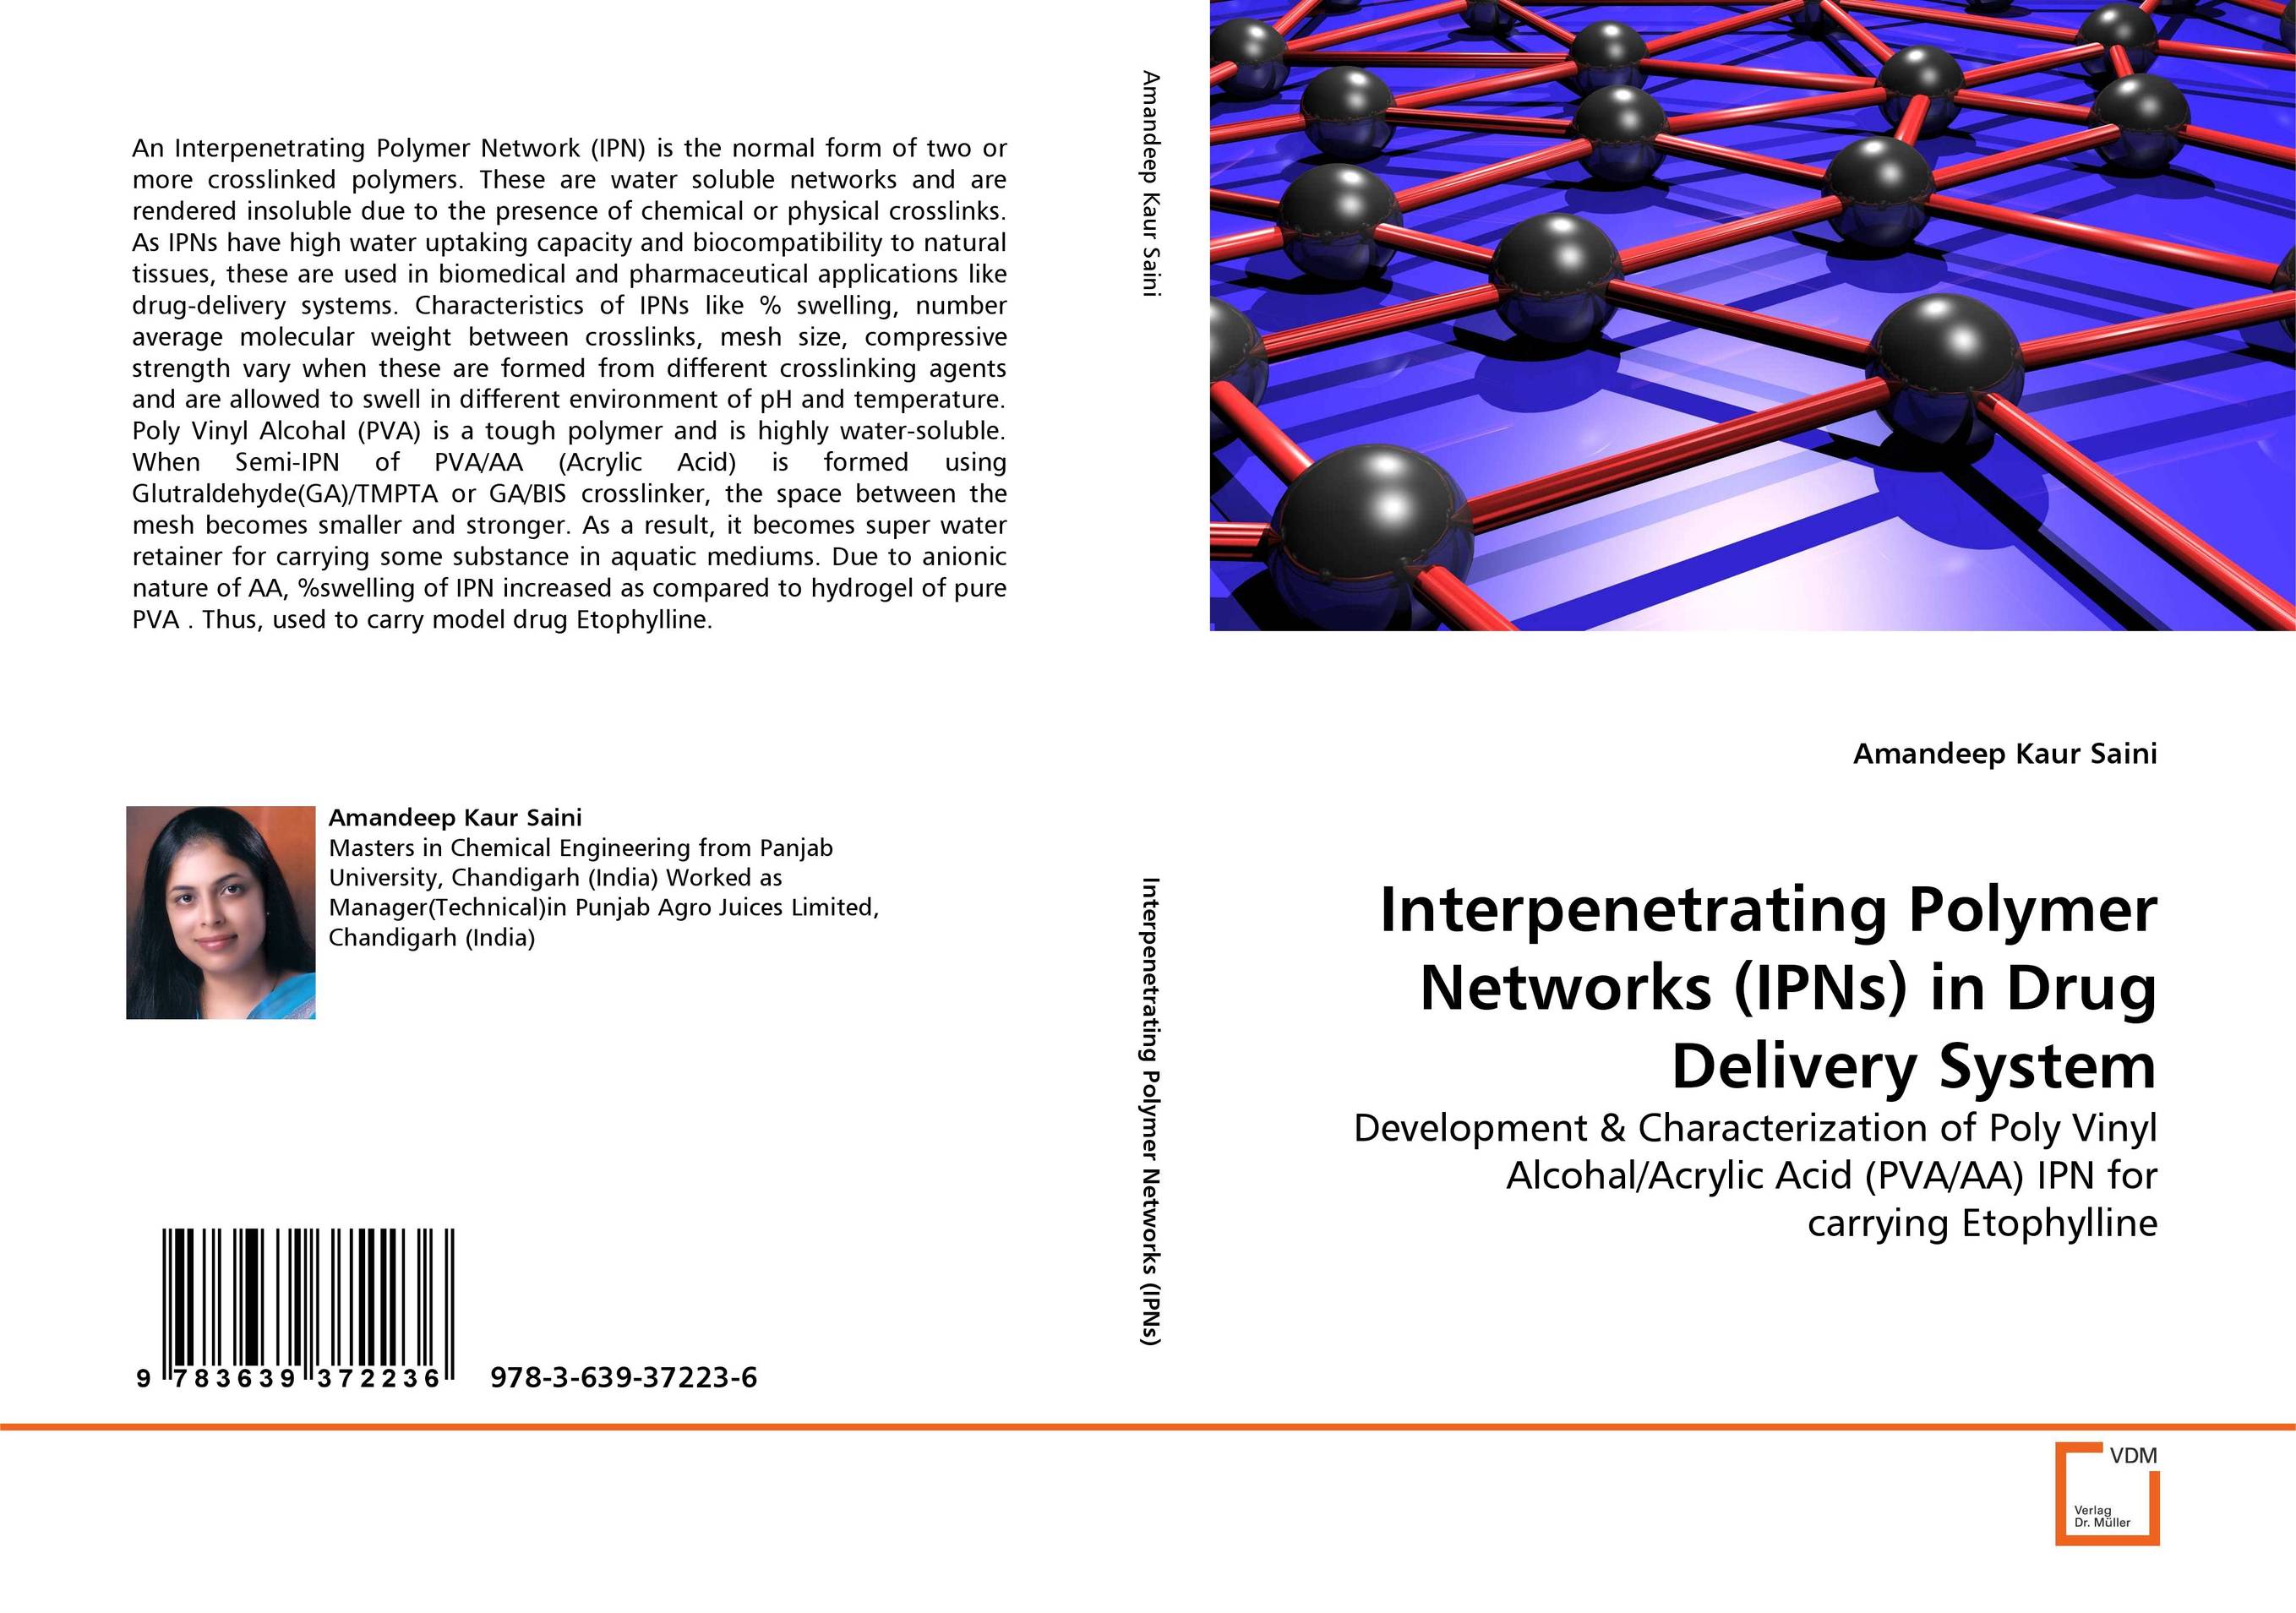 Interpenetrating Polymer Networks (IPNs) in Drug Delivery System